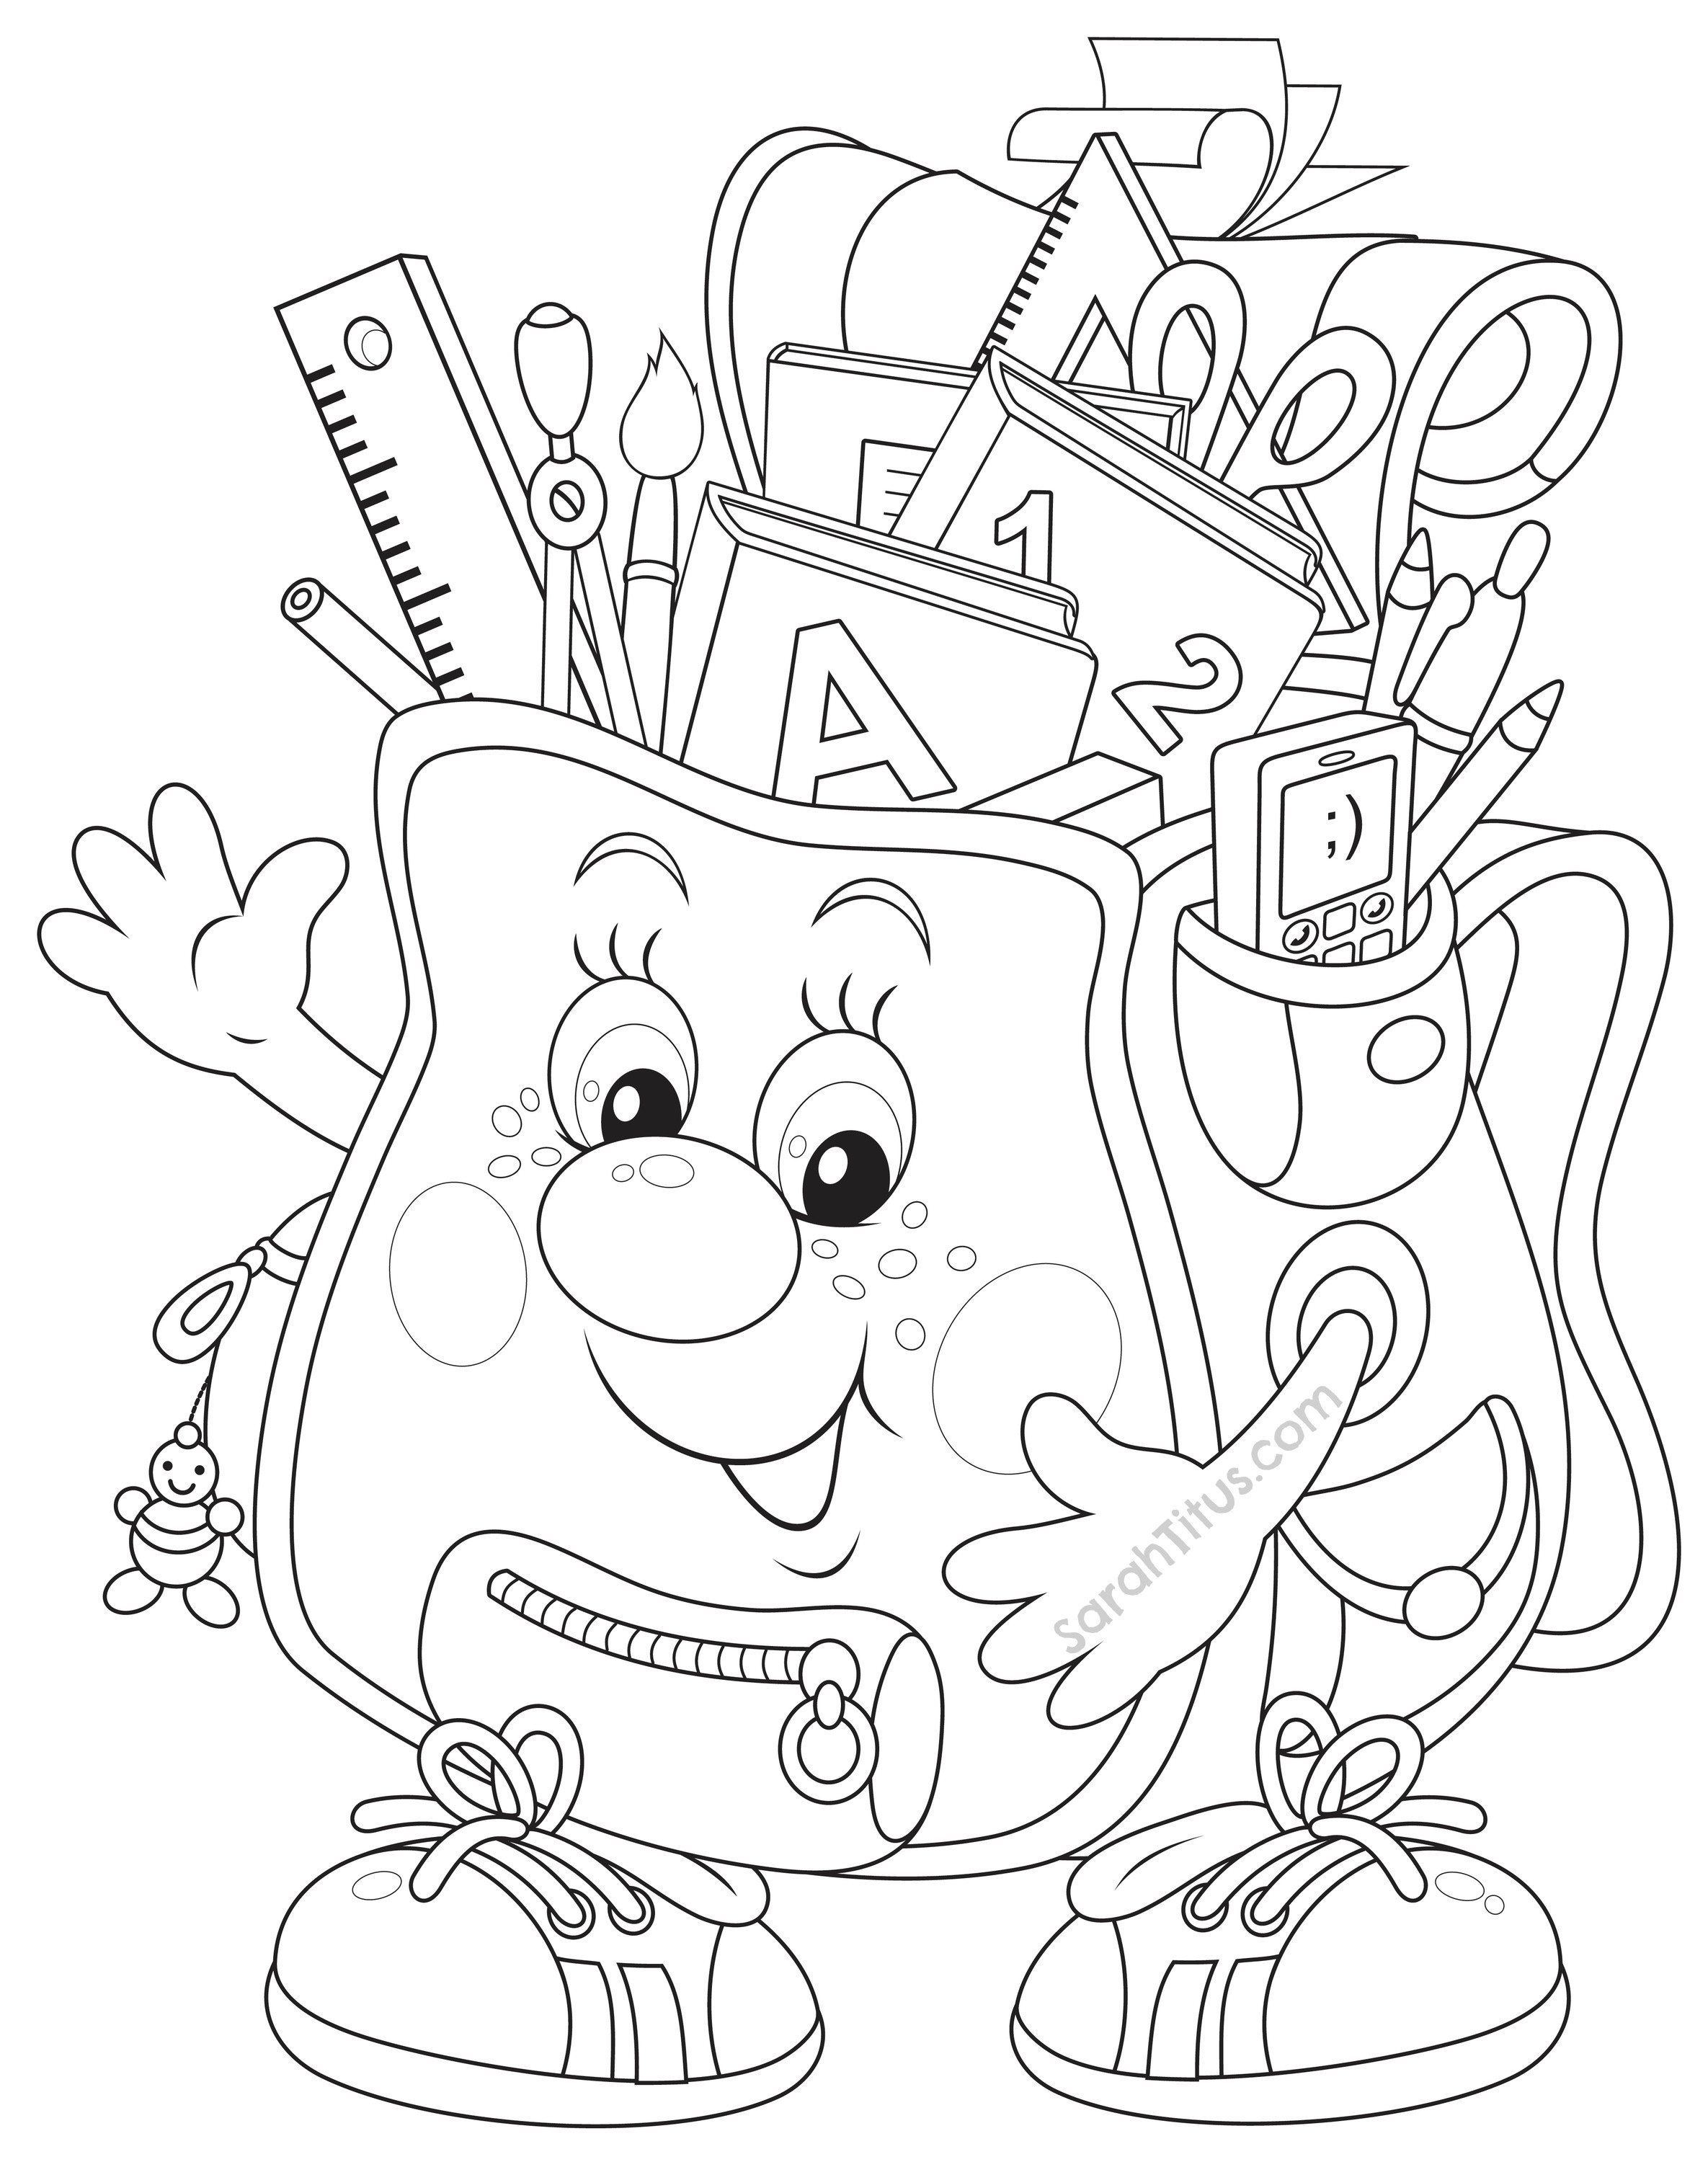 Coloring Books For Toddlers At Home
 Back to School Coloring Pages Sarah Titus